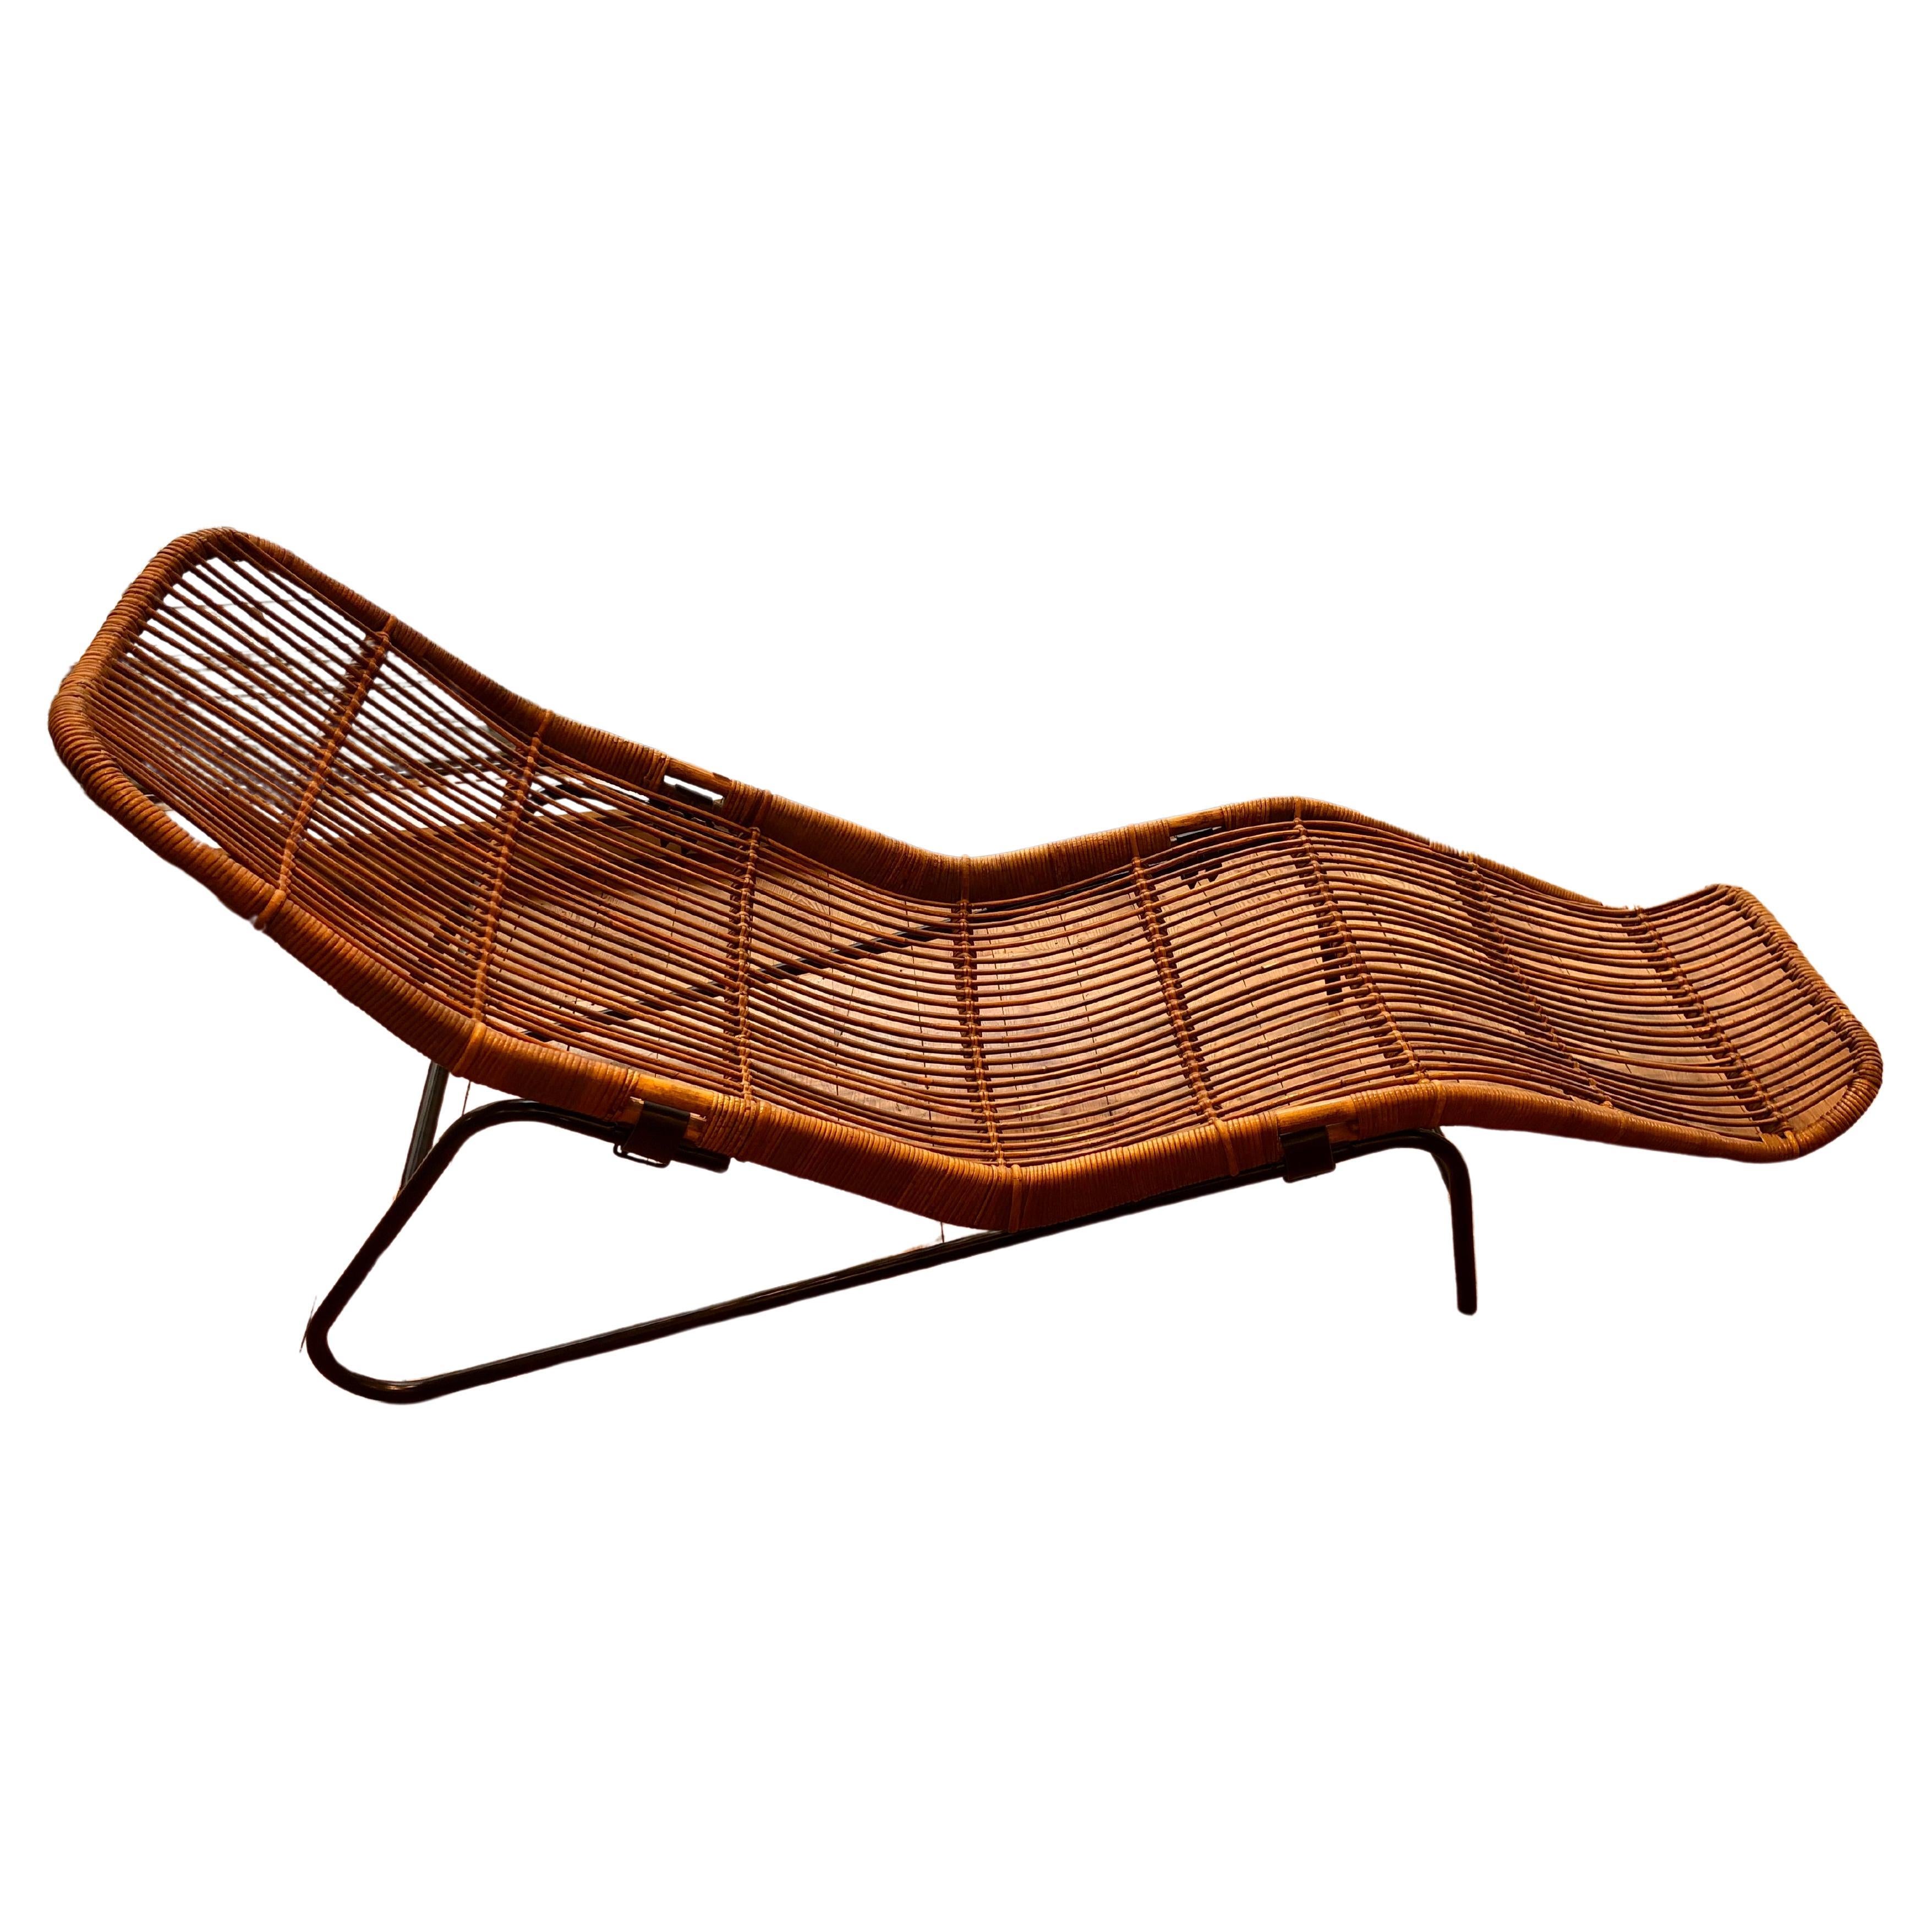 wicker lounge chair designed by the talented designer Dirk Van Sliedrecht:
This remarkable wicker lounge chair transcends mere functionality—it embodies a harmonious blend of craftsmanship, aesthetics, and rarity. Crafted meticulously it stands as a